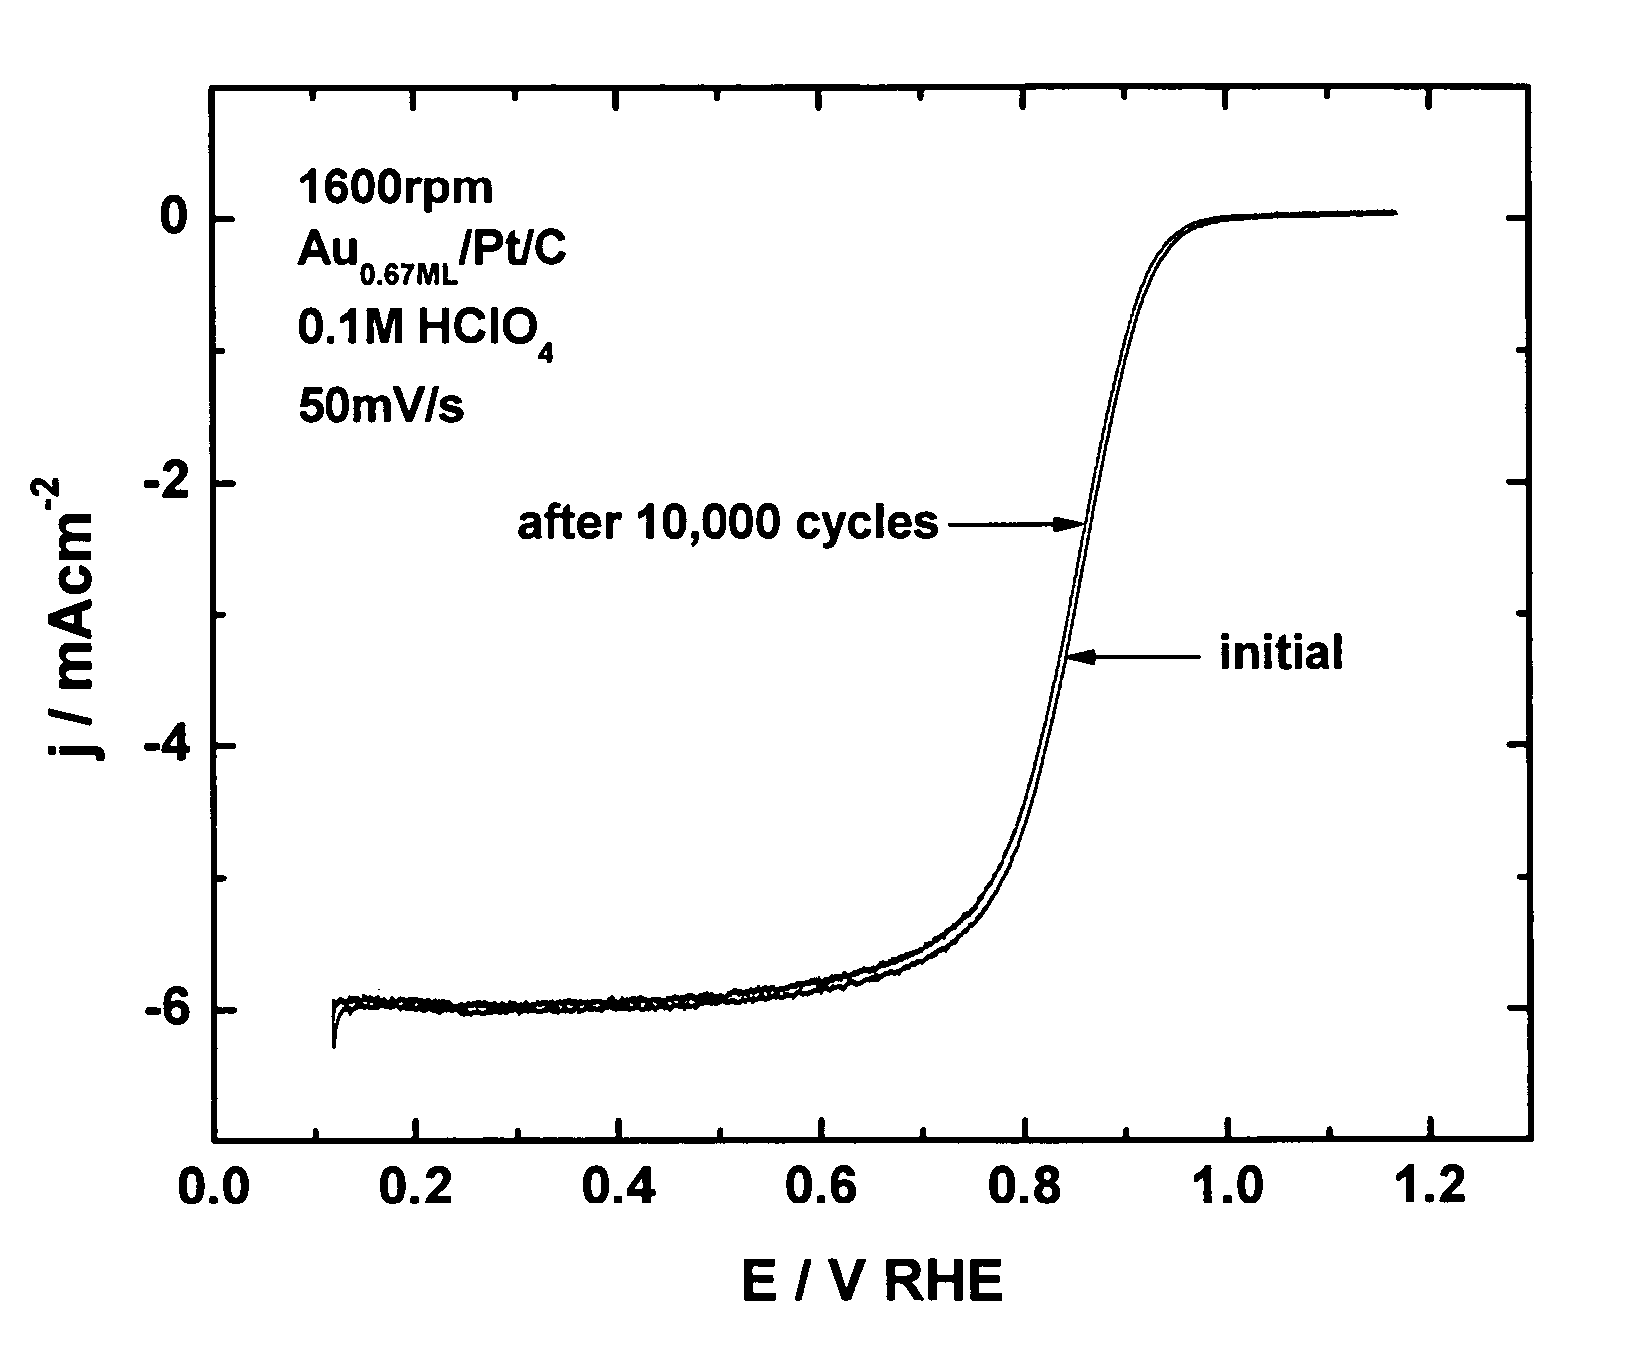 Electrocatalysts having gold monolayers on platinum nanoparticle cores, and uses thereof